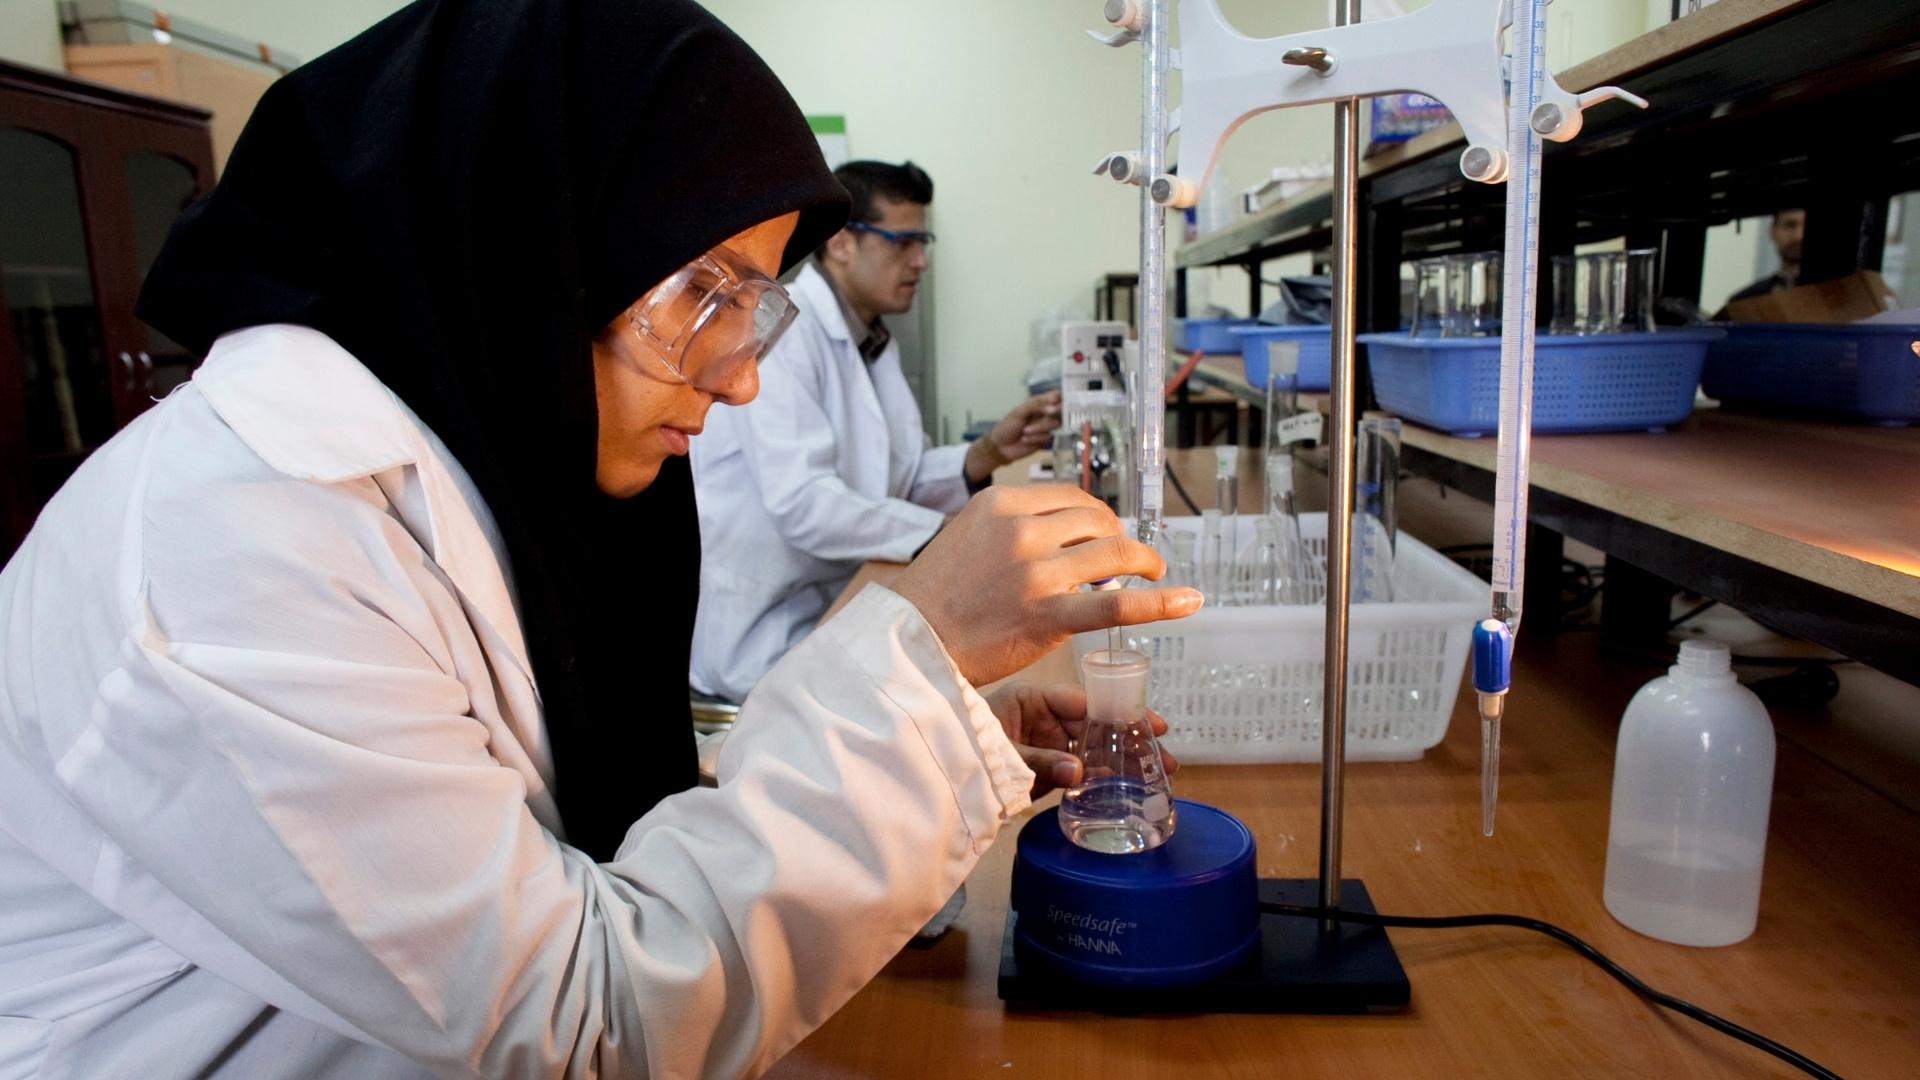 Afghan will cause huge losses to science, say researchers